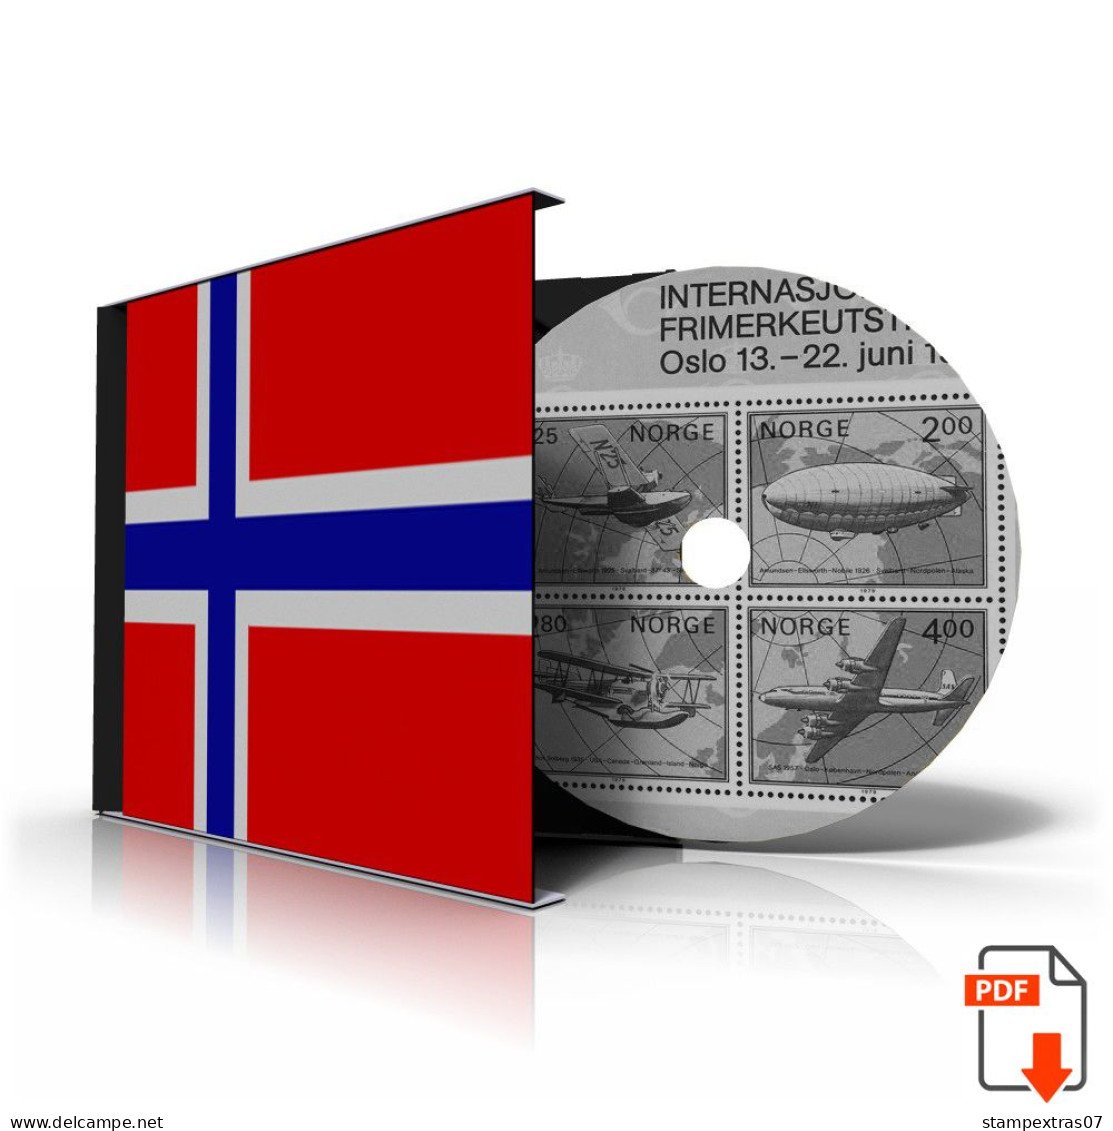 NORWAY 1855-2010 STAMP ALBUM PAGES (183 B&w Illustrated Pages) - Anglais